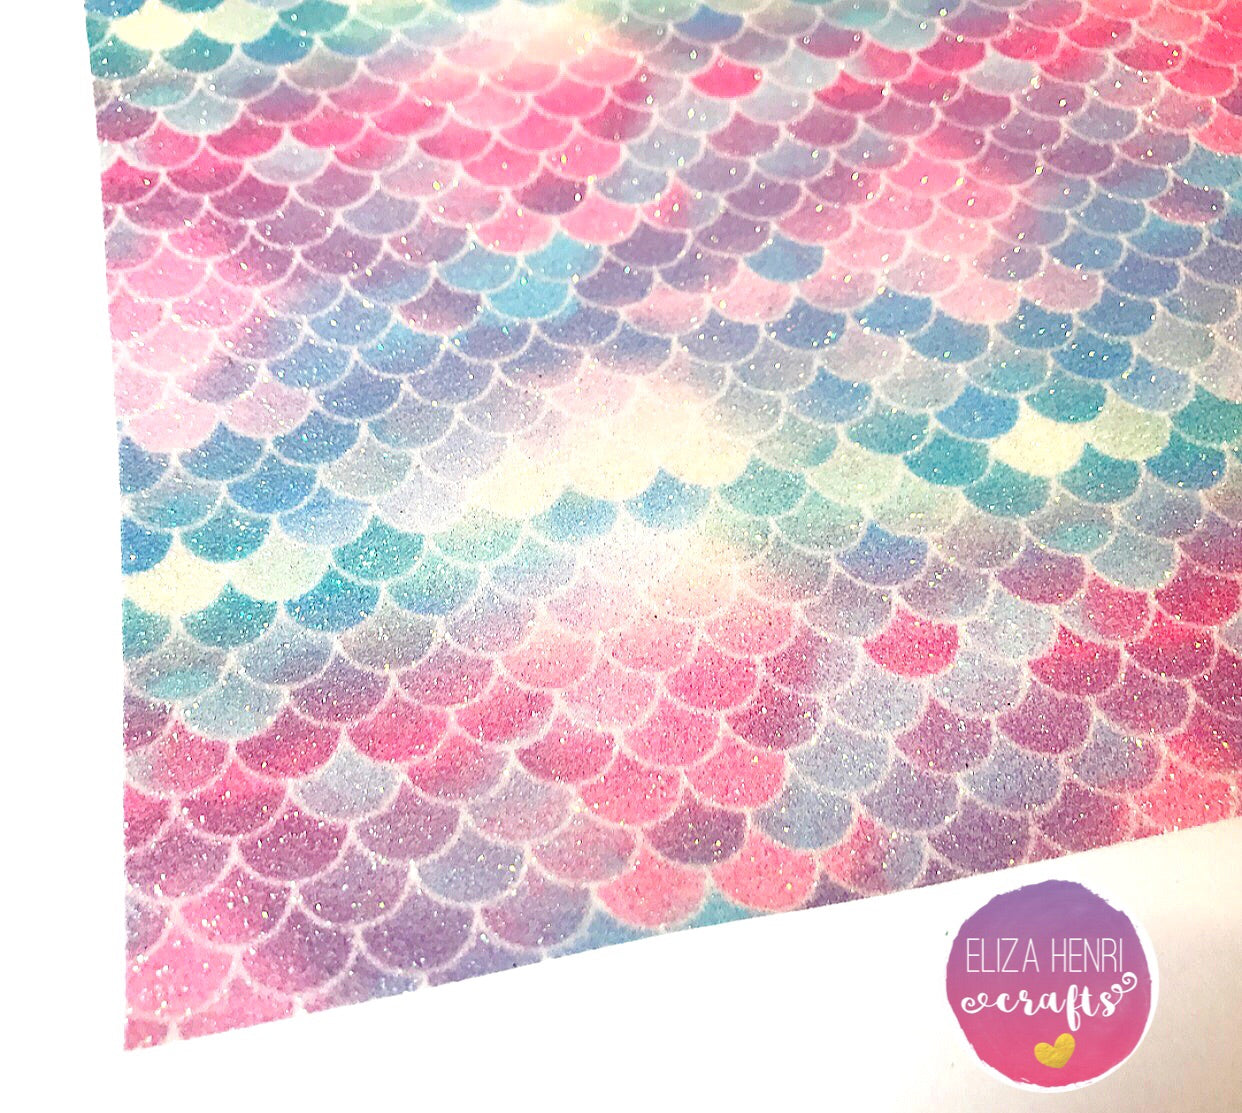 EXCLUSIVE Sorry Mermaids only Fine scales Glitter Fabric - Eliza Henri Craft Supply